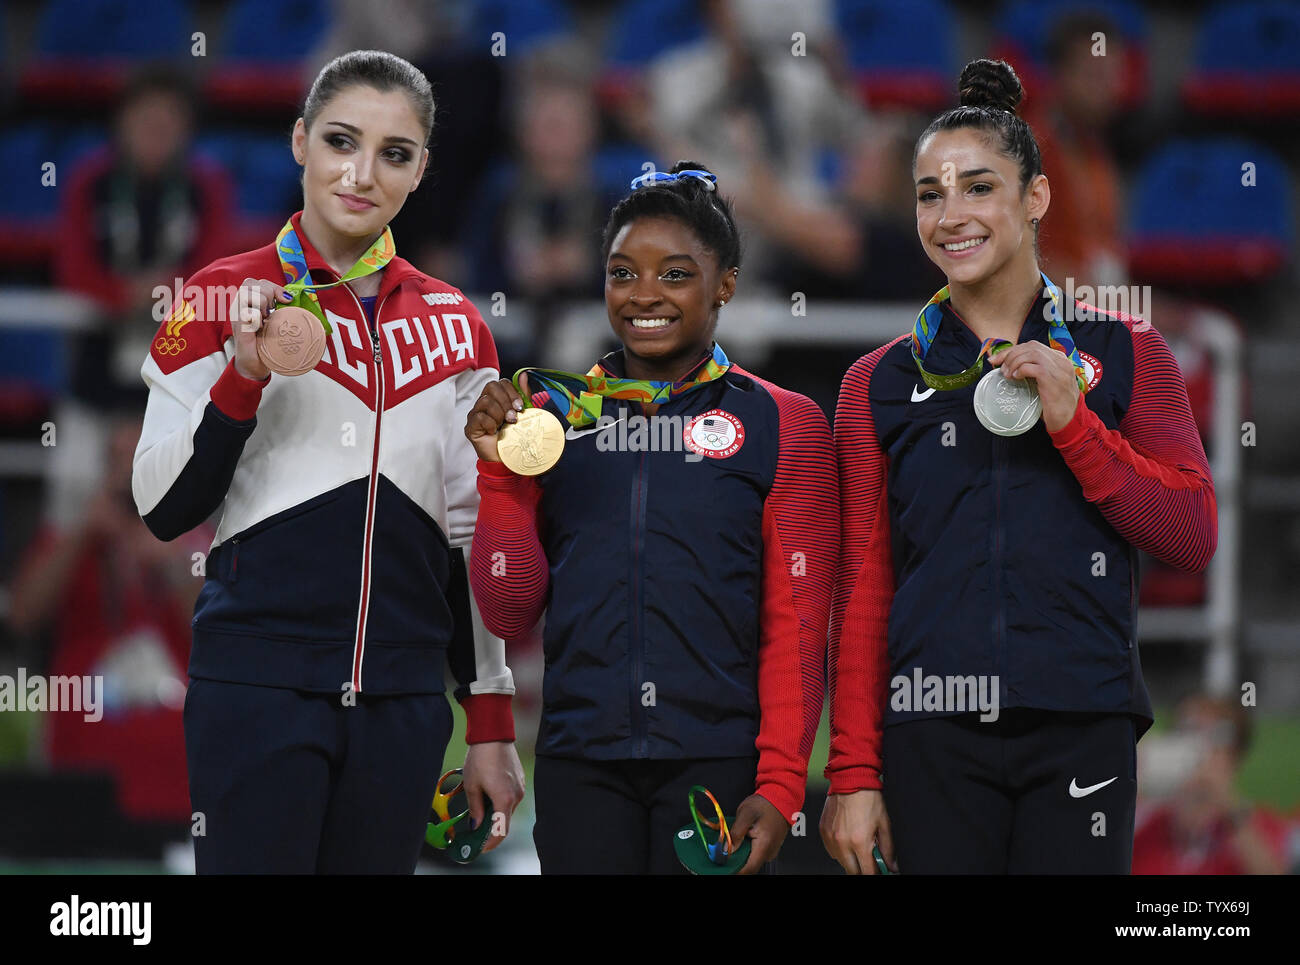 Aliya Mustafina of Russia, Simone Biles and Aly Raisman of the United States stand with their medals at the medal ceremony at the Women's Individual all around in artistic gymnastics at HSBC Arena (Arena Ol’mpica do Rio) at the 2016 Rio Summer Olympics in Rio de Janeiro, Brazil, on August 11, 2016. Simone Biles of the United States won the gold. Photo by Terry Schmitt/UPI Stock Photo